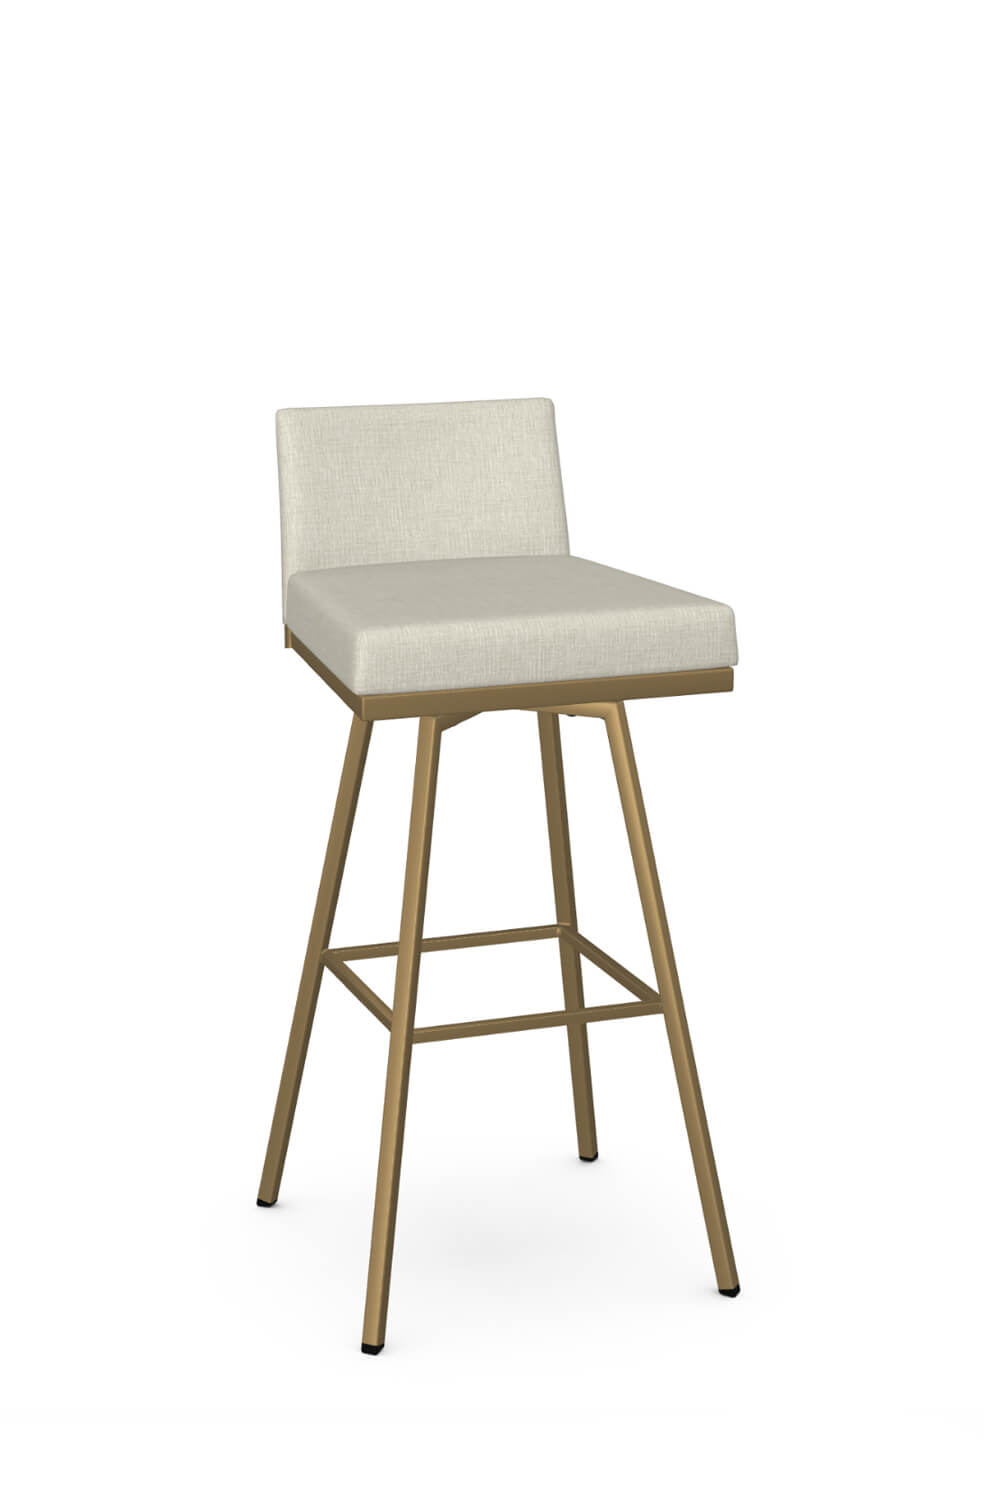 Bar Stools with Back Support